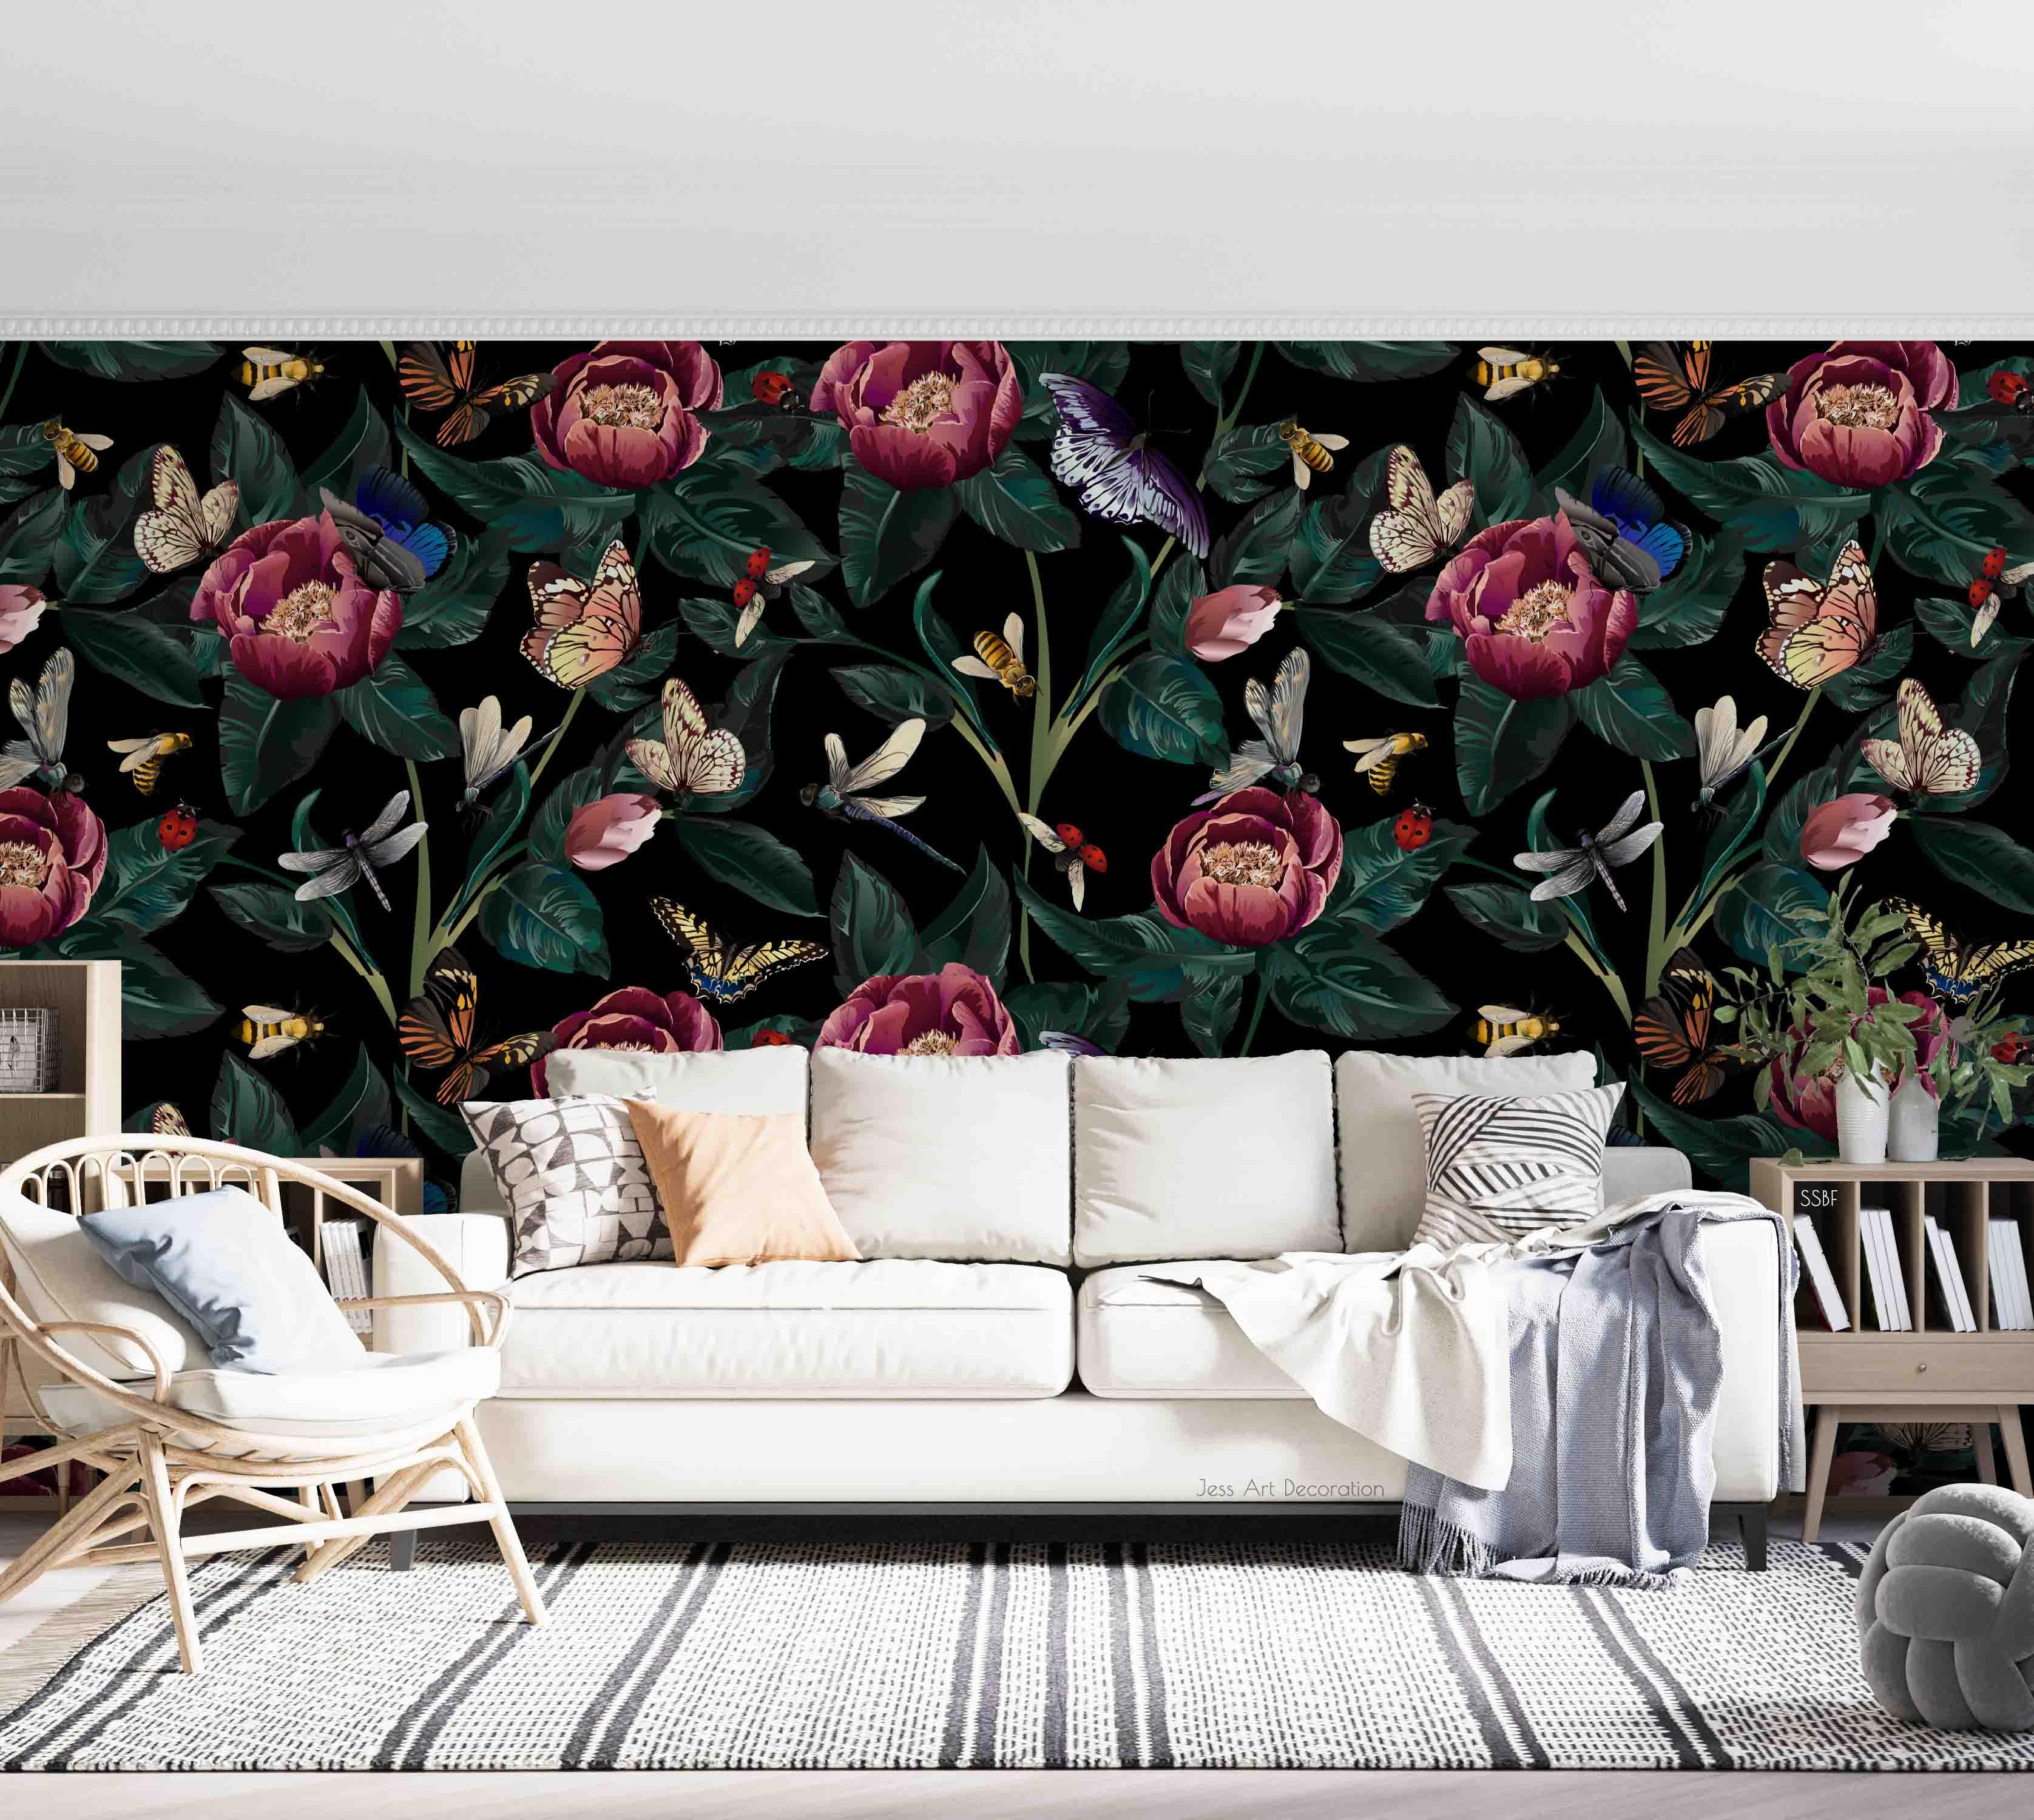 3D Vintage Blooming Red Flowers Leaf Butterfly Bee Wall Mural Wallpaper GD 3529- Jess Art Decoration